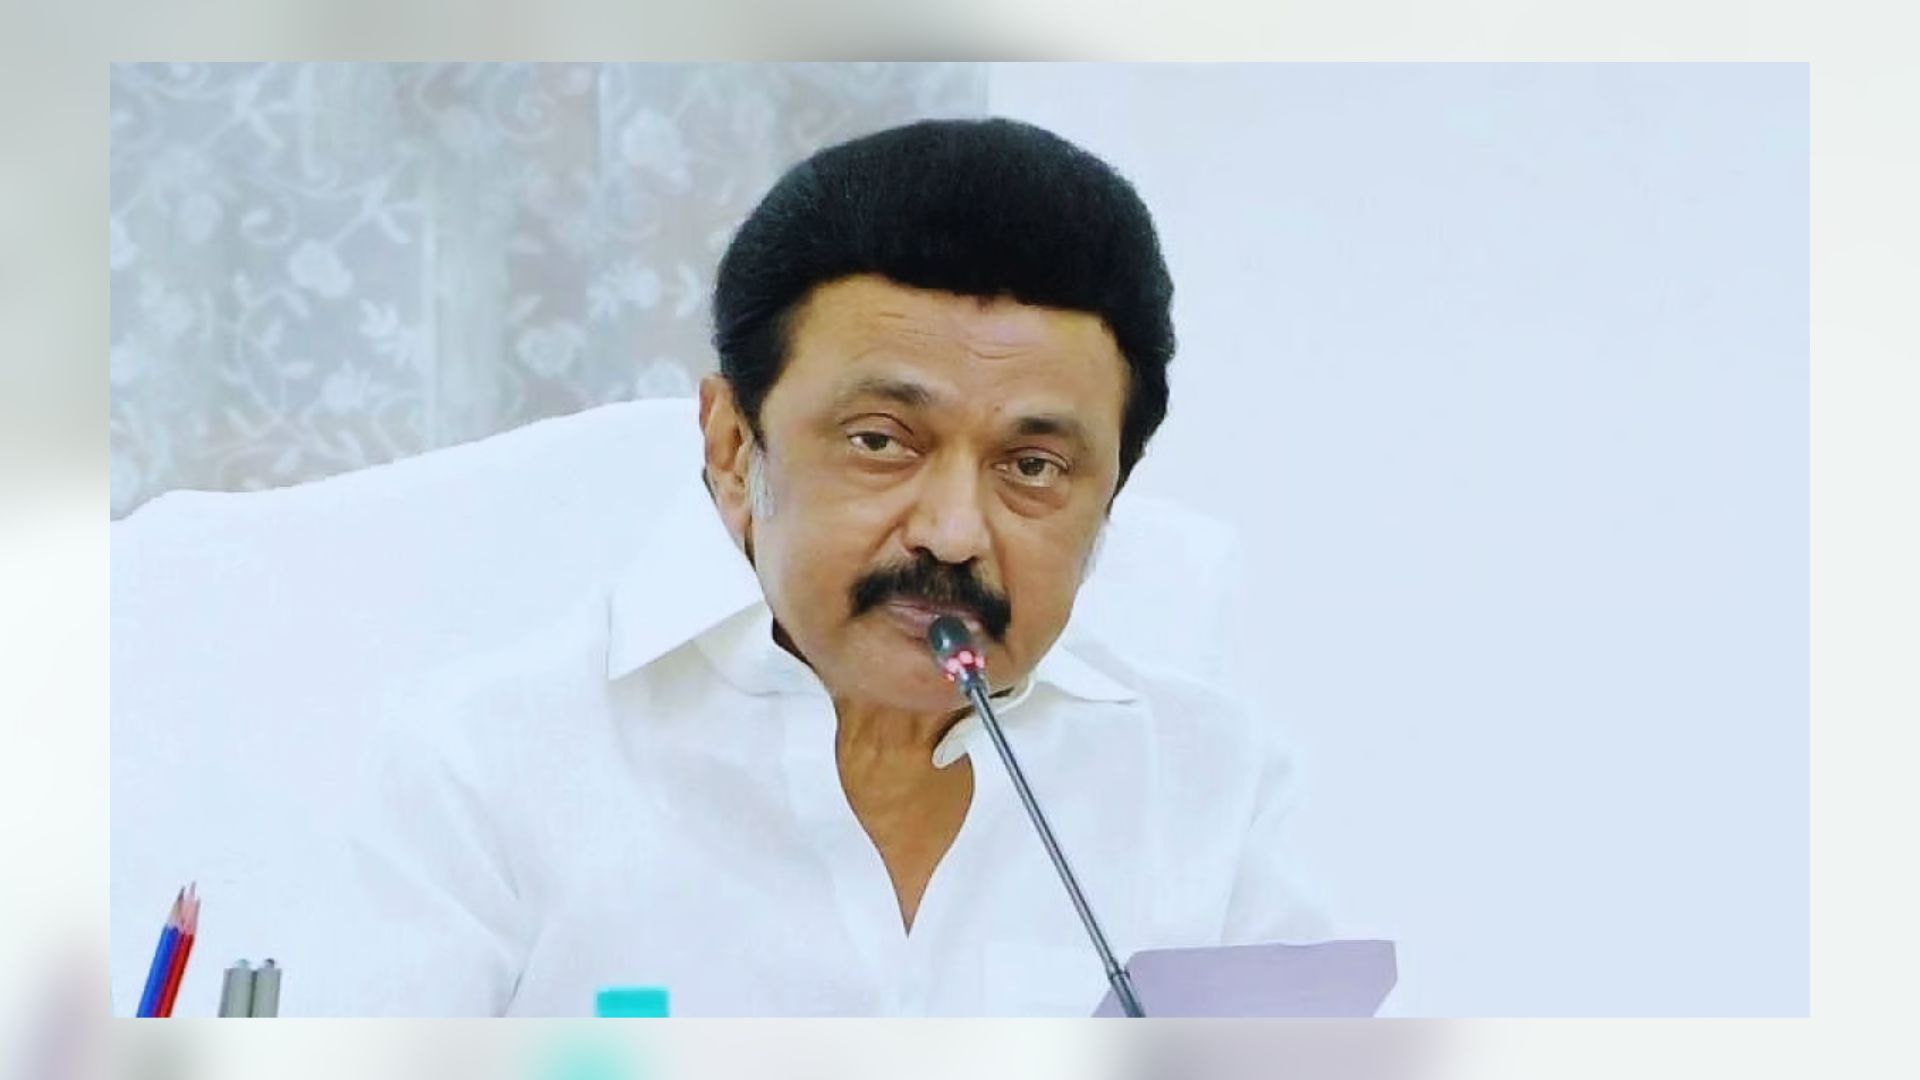 ‘You will be isolated’: MK Stalin’s Caution To PM Narendra Modi